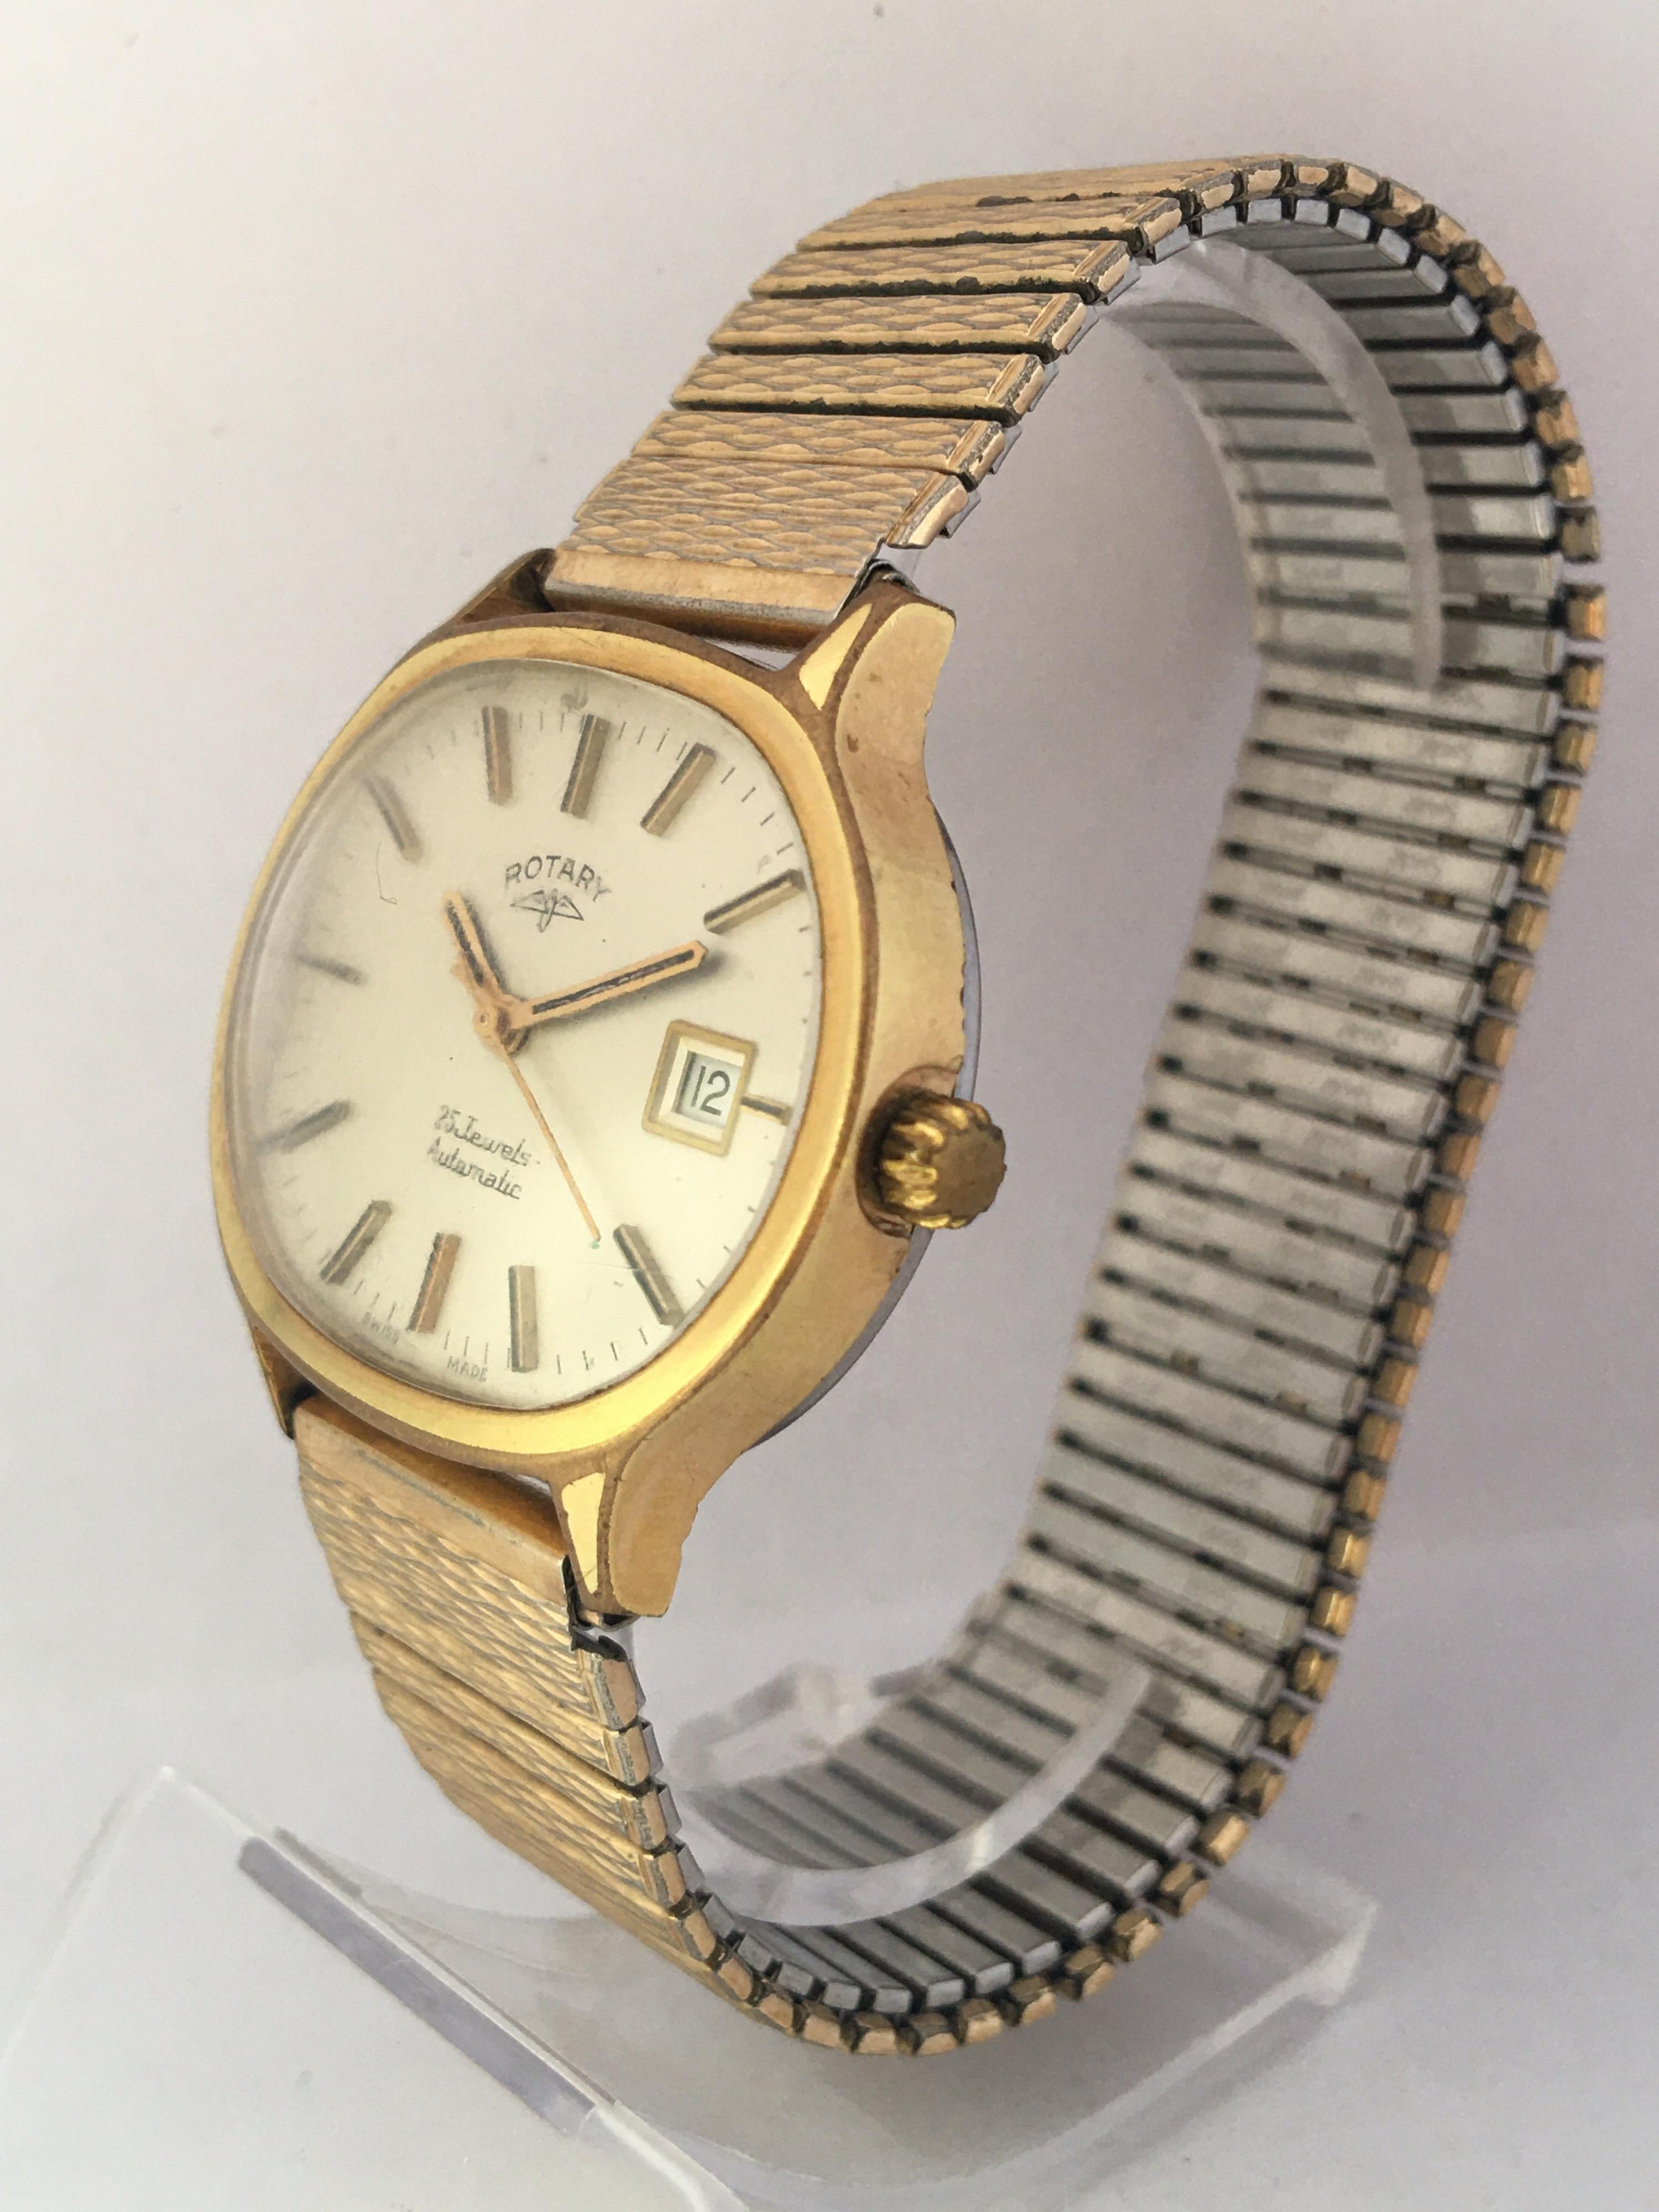 This beautiful pre-owned vintage mechanical watch is in good working condition and it is ticking well however due to its age and unserviced watch I cannot guarantee its time accuracy. Visible signs of ageing and wear with tiny and light scratches on